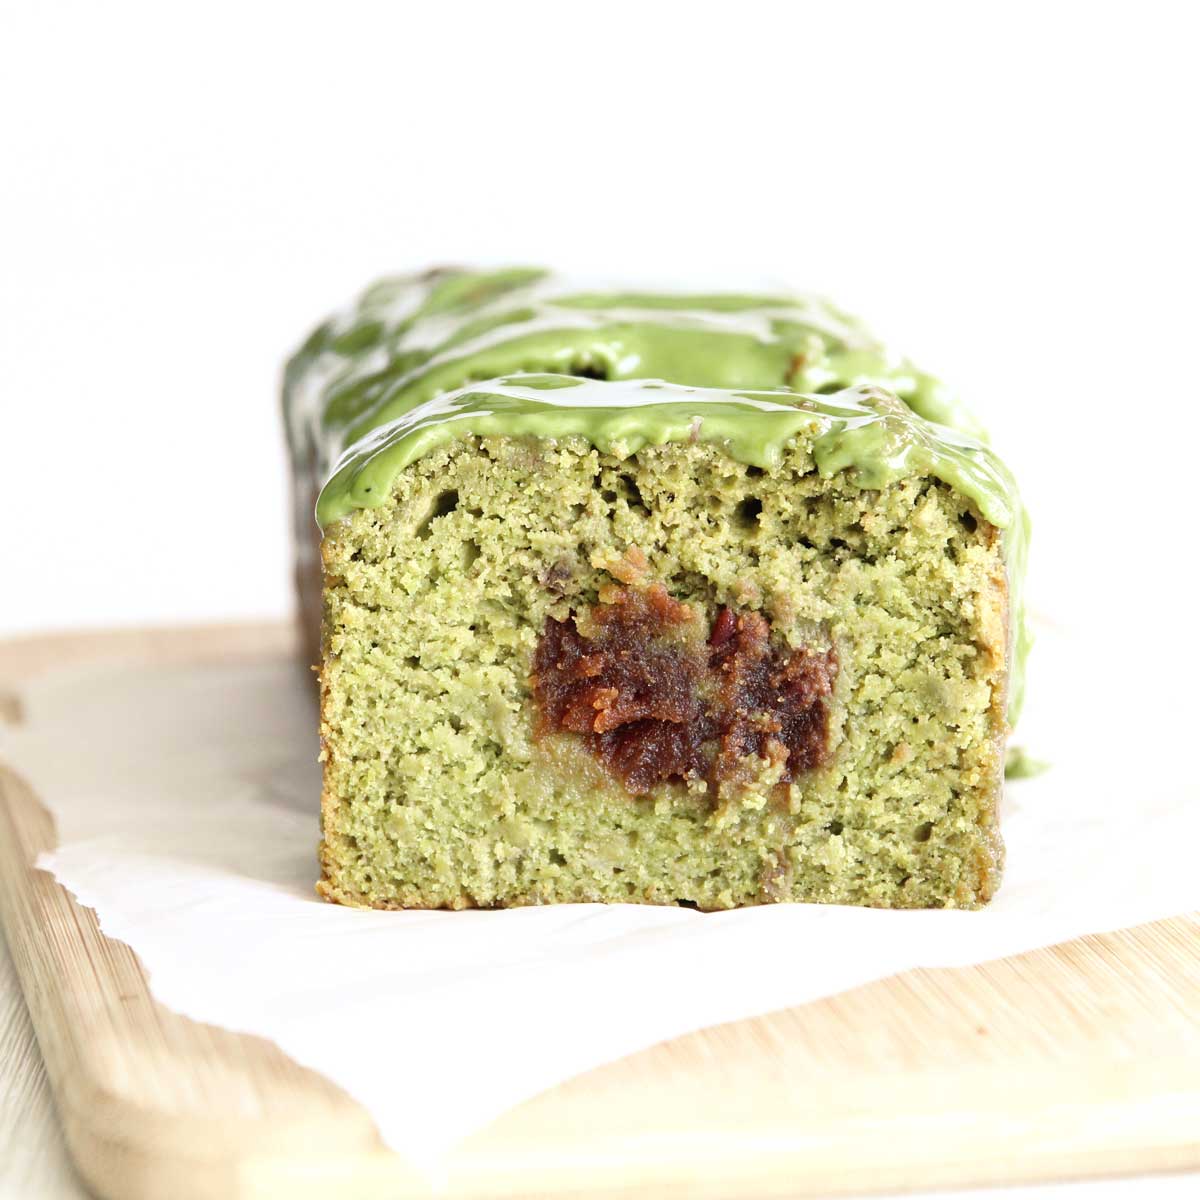 How to Make Matcha Banana Bread with Red Bean Paste Filling - Pumpkin Bread With Banana